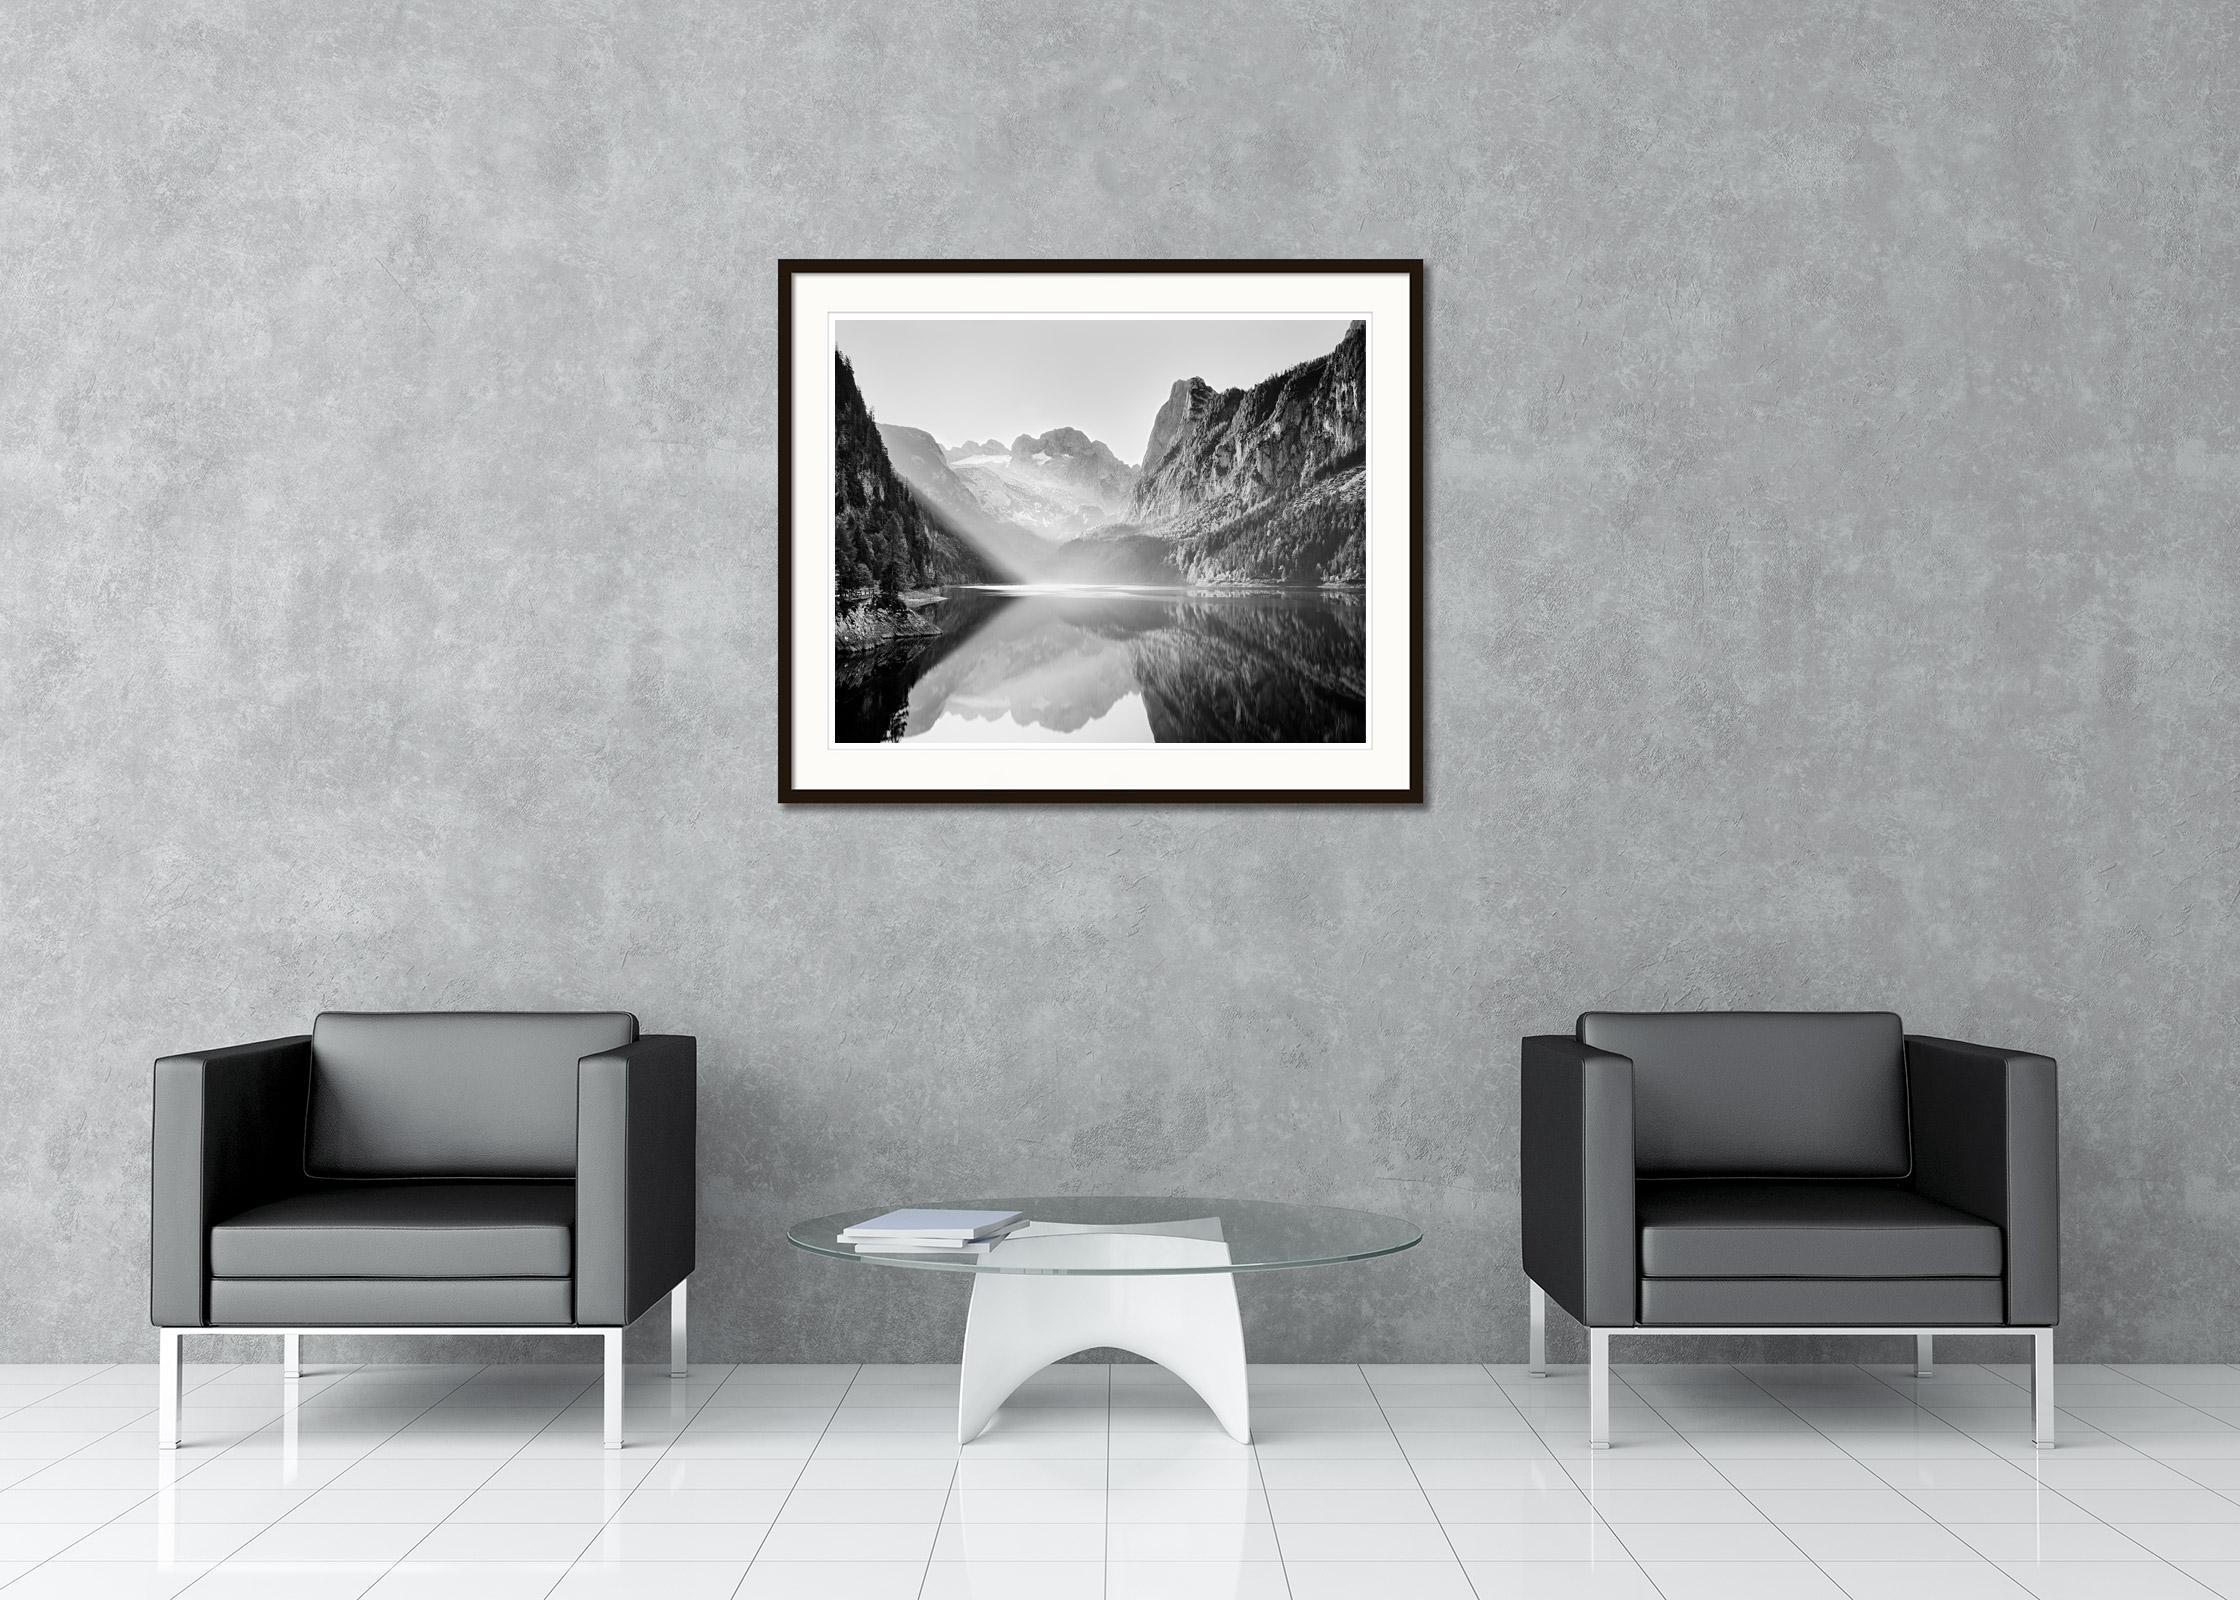 Black and White Fine Art Landscape Photography - Amazing landscape photo with beautiful lighting of mountains with lake at sunrise. Archival pigment ink print, edition of 15. Signed, titled, dated and numbered by artist. Certificate of authenticity